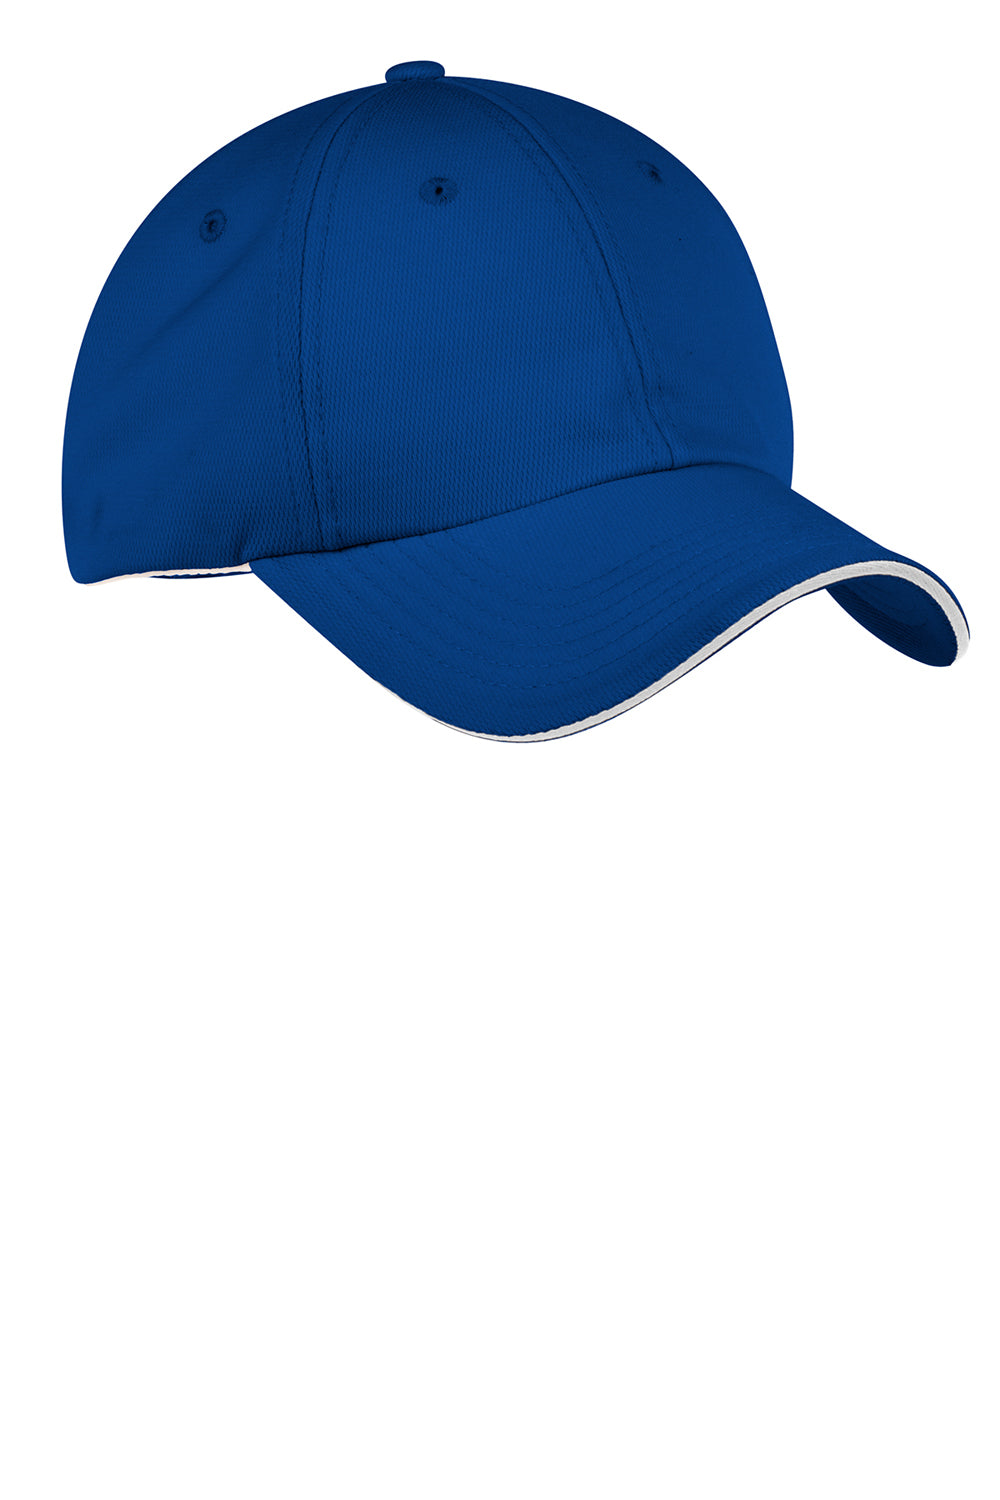 Port Authority C838 Mens Dry Zone Moisture Wicking Adjustable Hat Royal Blue Front